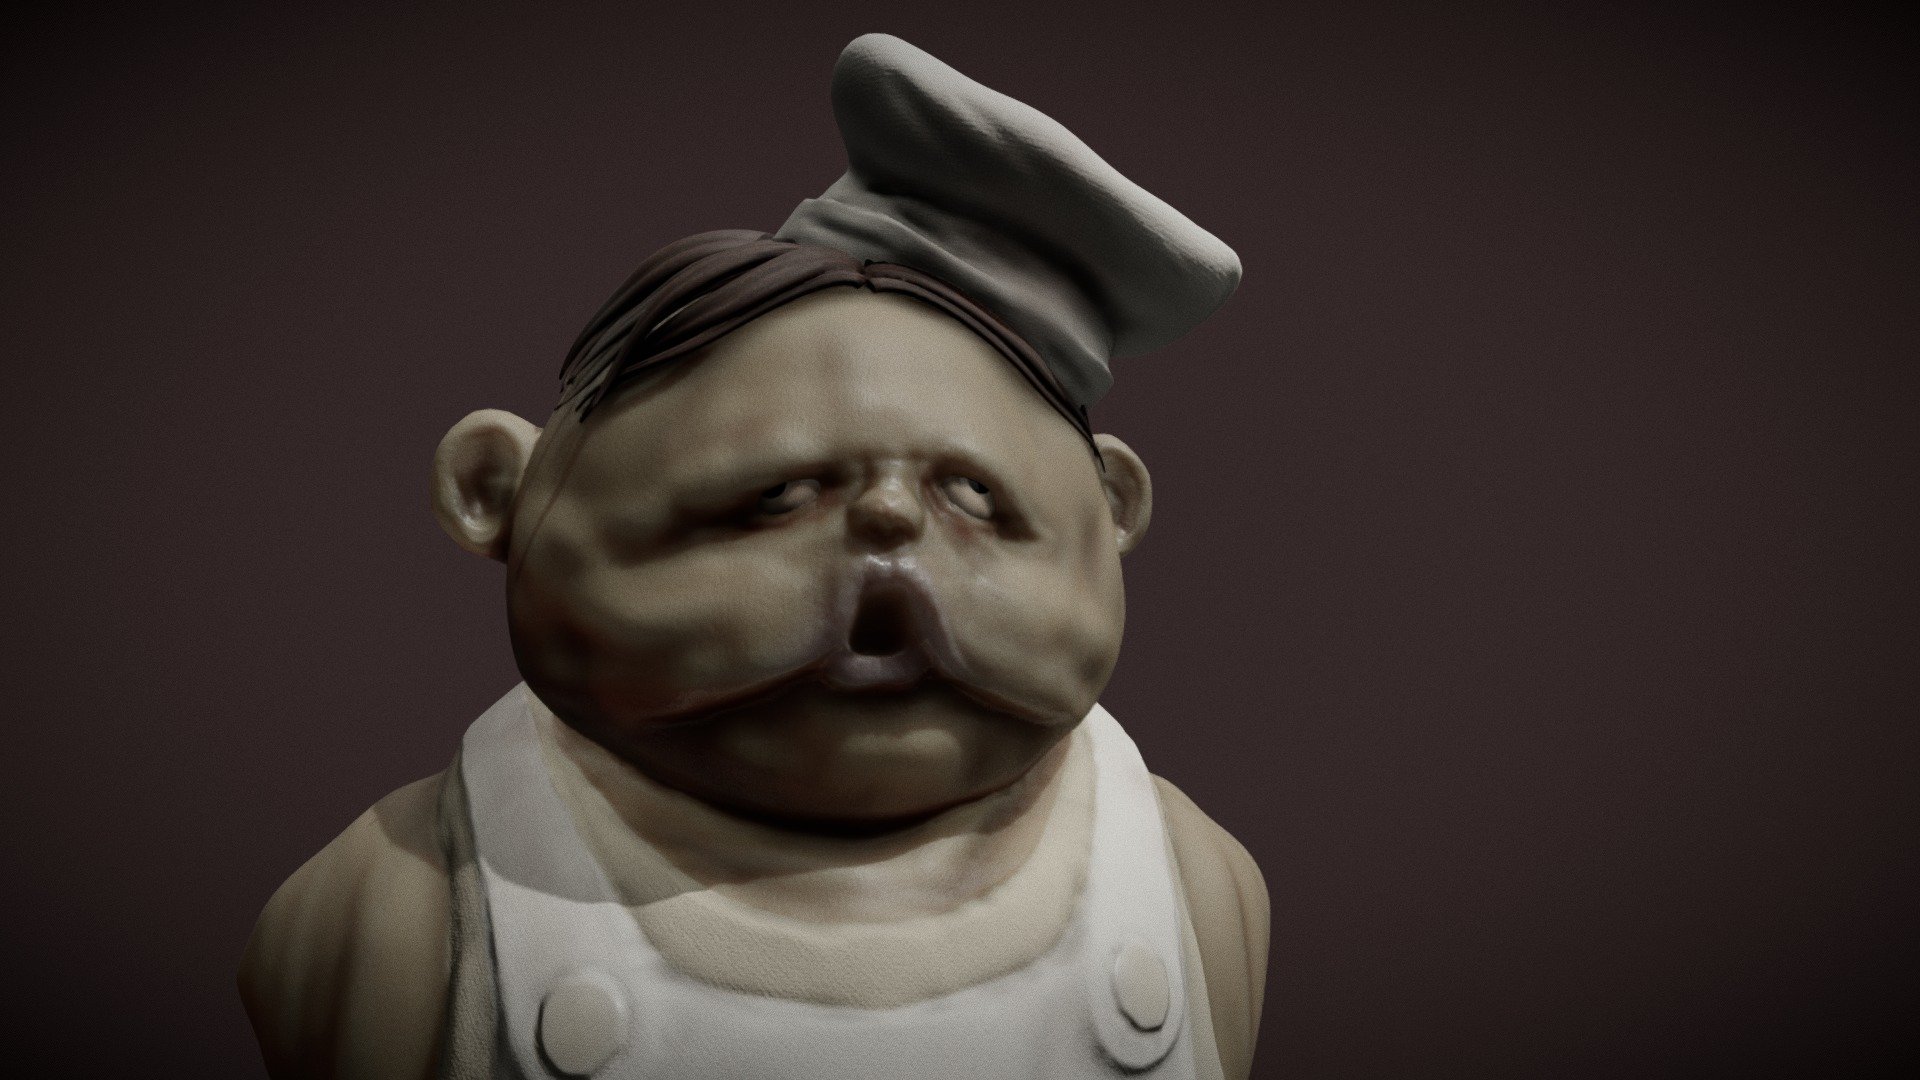 the chef little nightmares